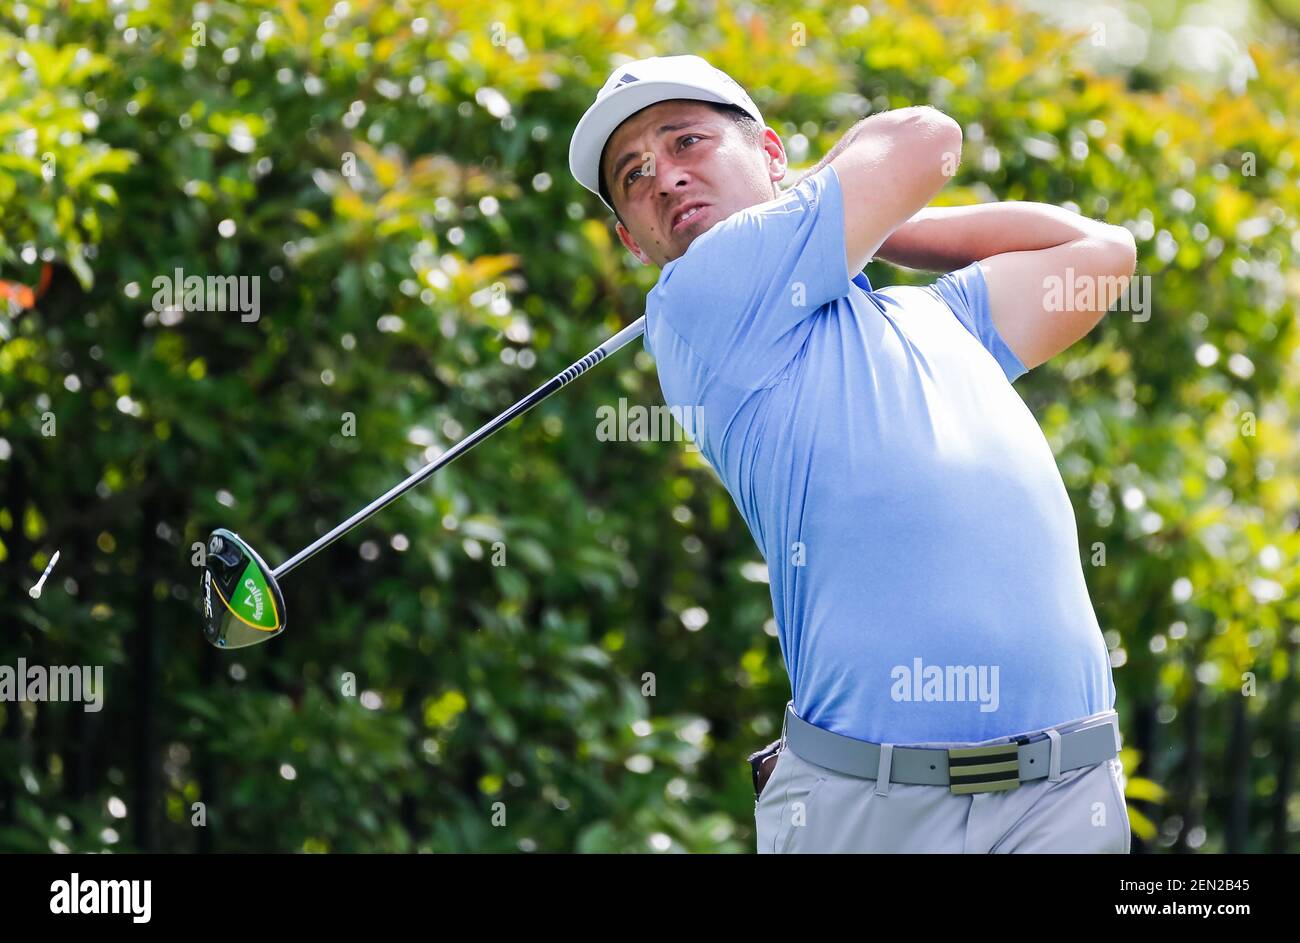 May 23, 2019; Fort Worth, TX, USA; Xander Schauffele plays his shot from  the 15th tee during the first round the Charles Schwab Challenge golf  tournament at Colonial Country Club. Mandatory Credit: